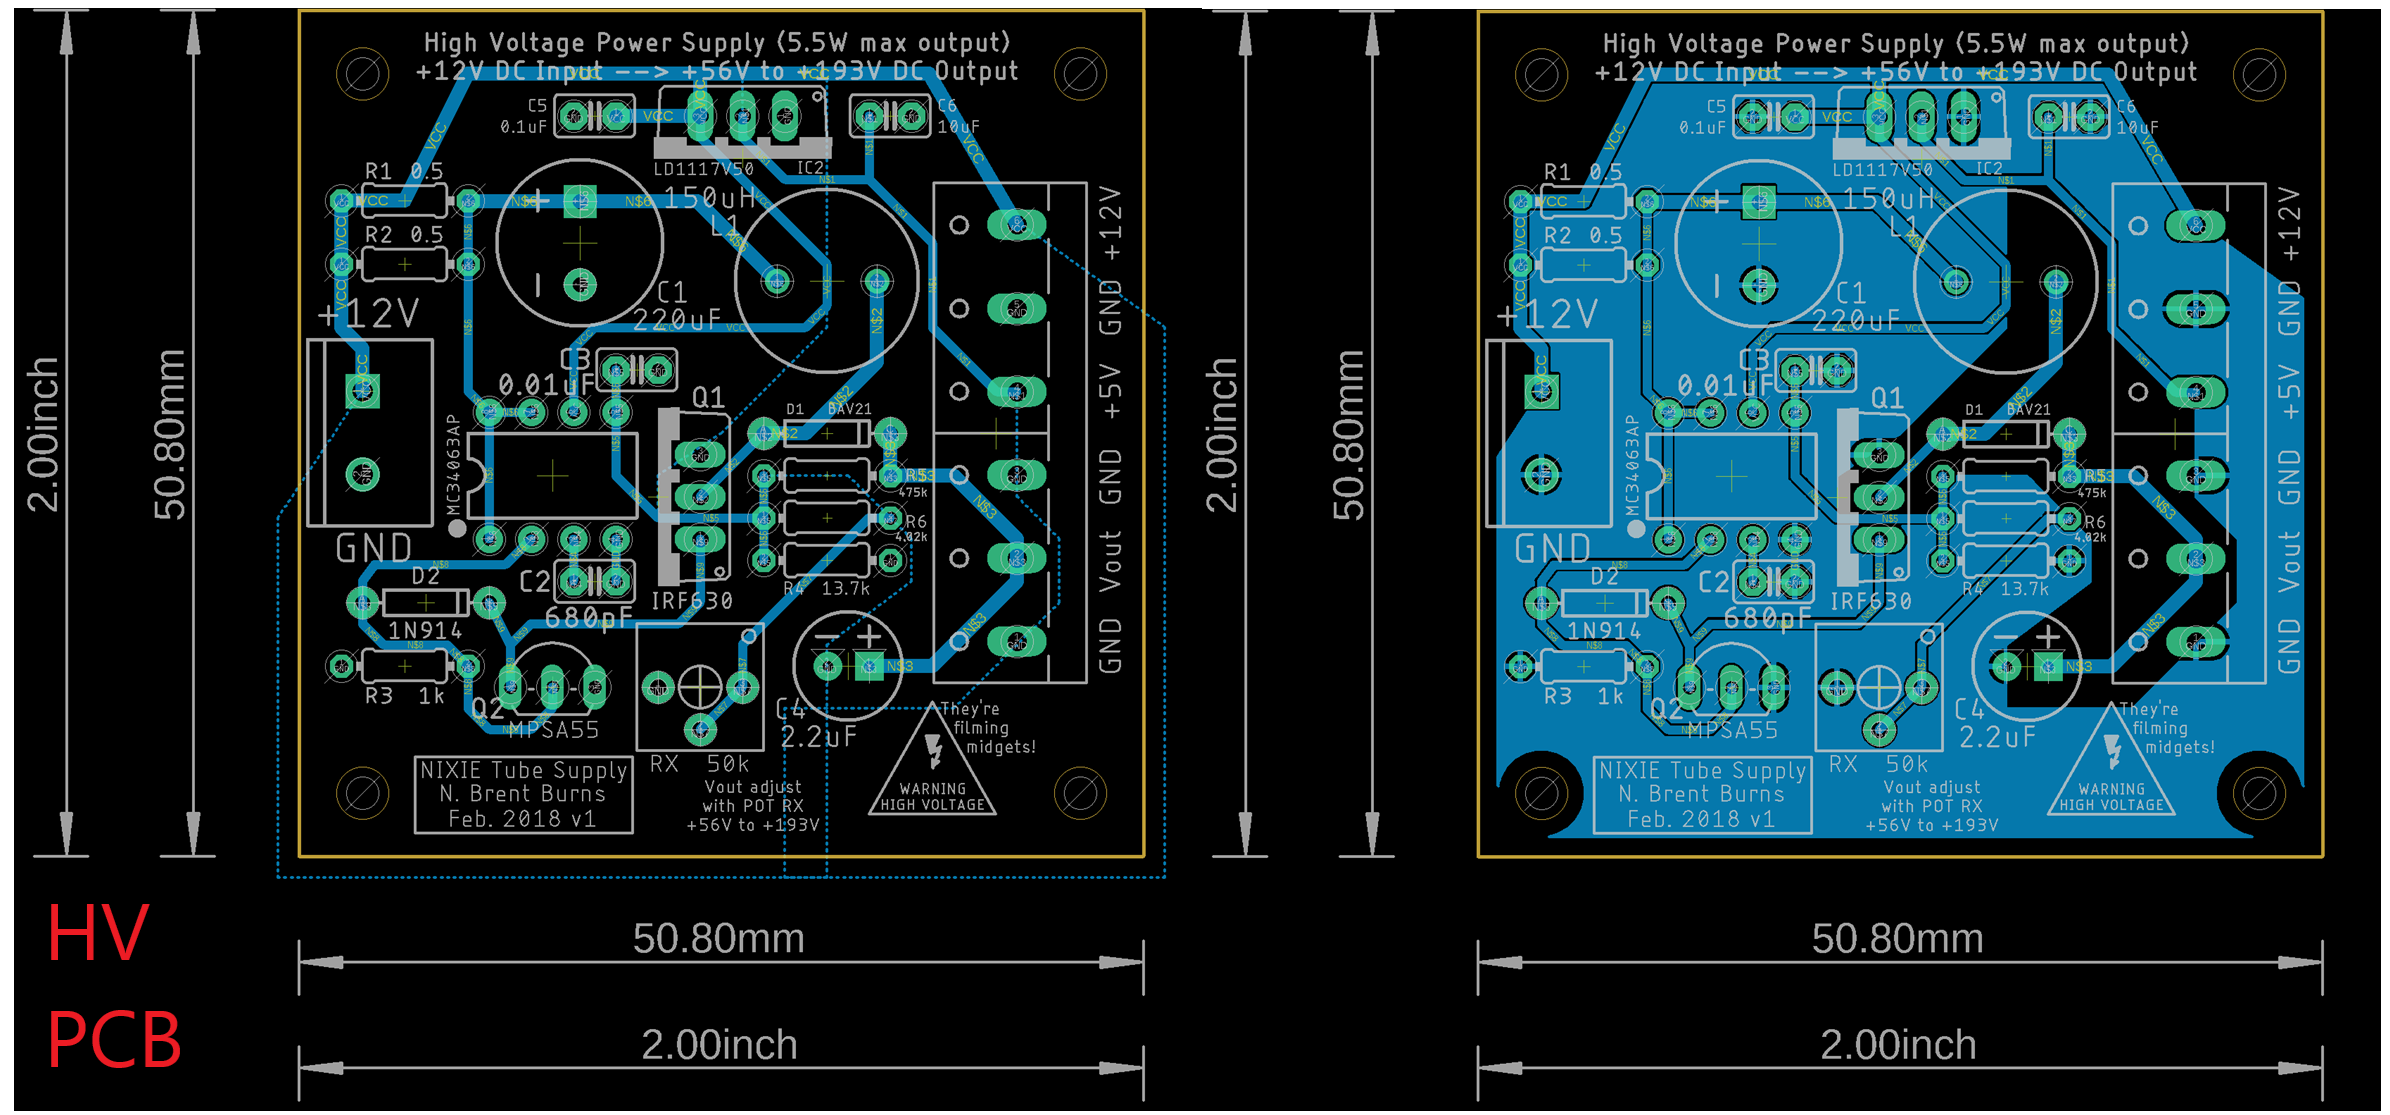 High Voltage Power Supply PCB for Nixie Tubes